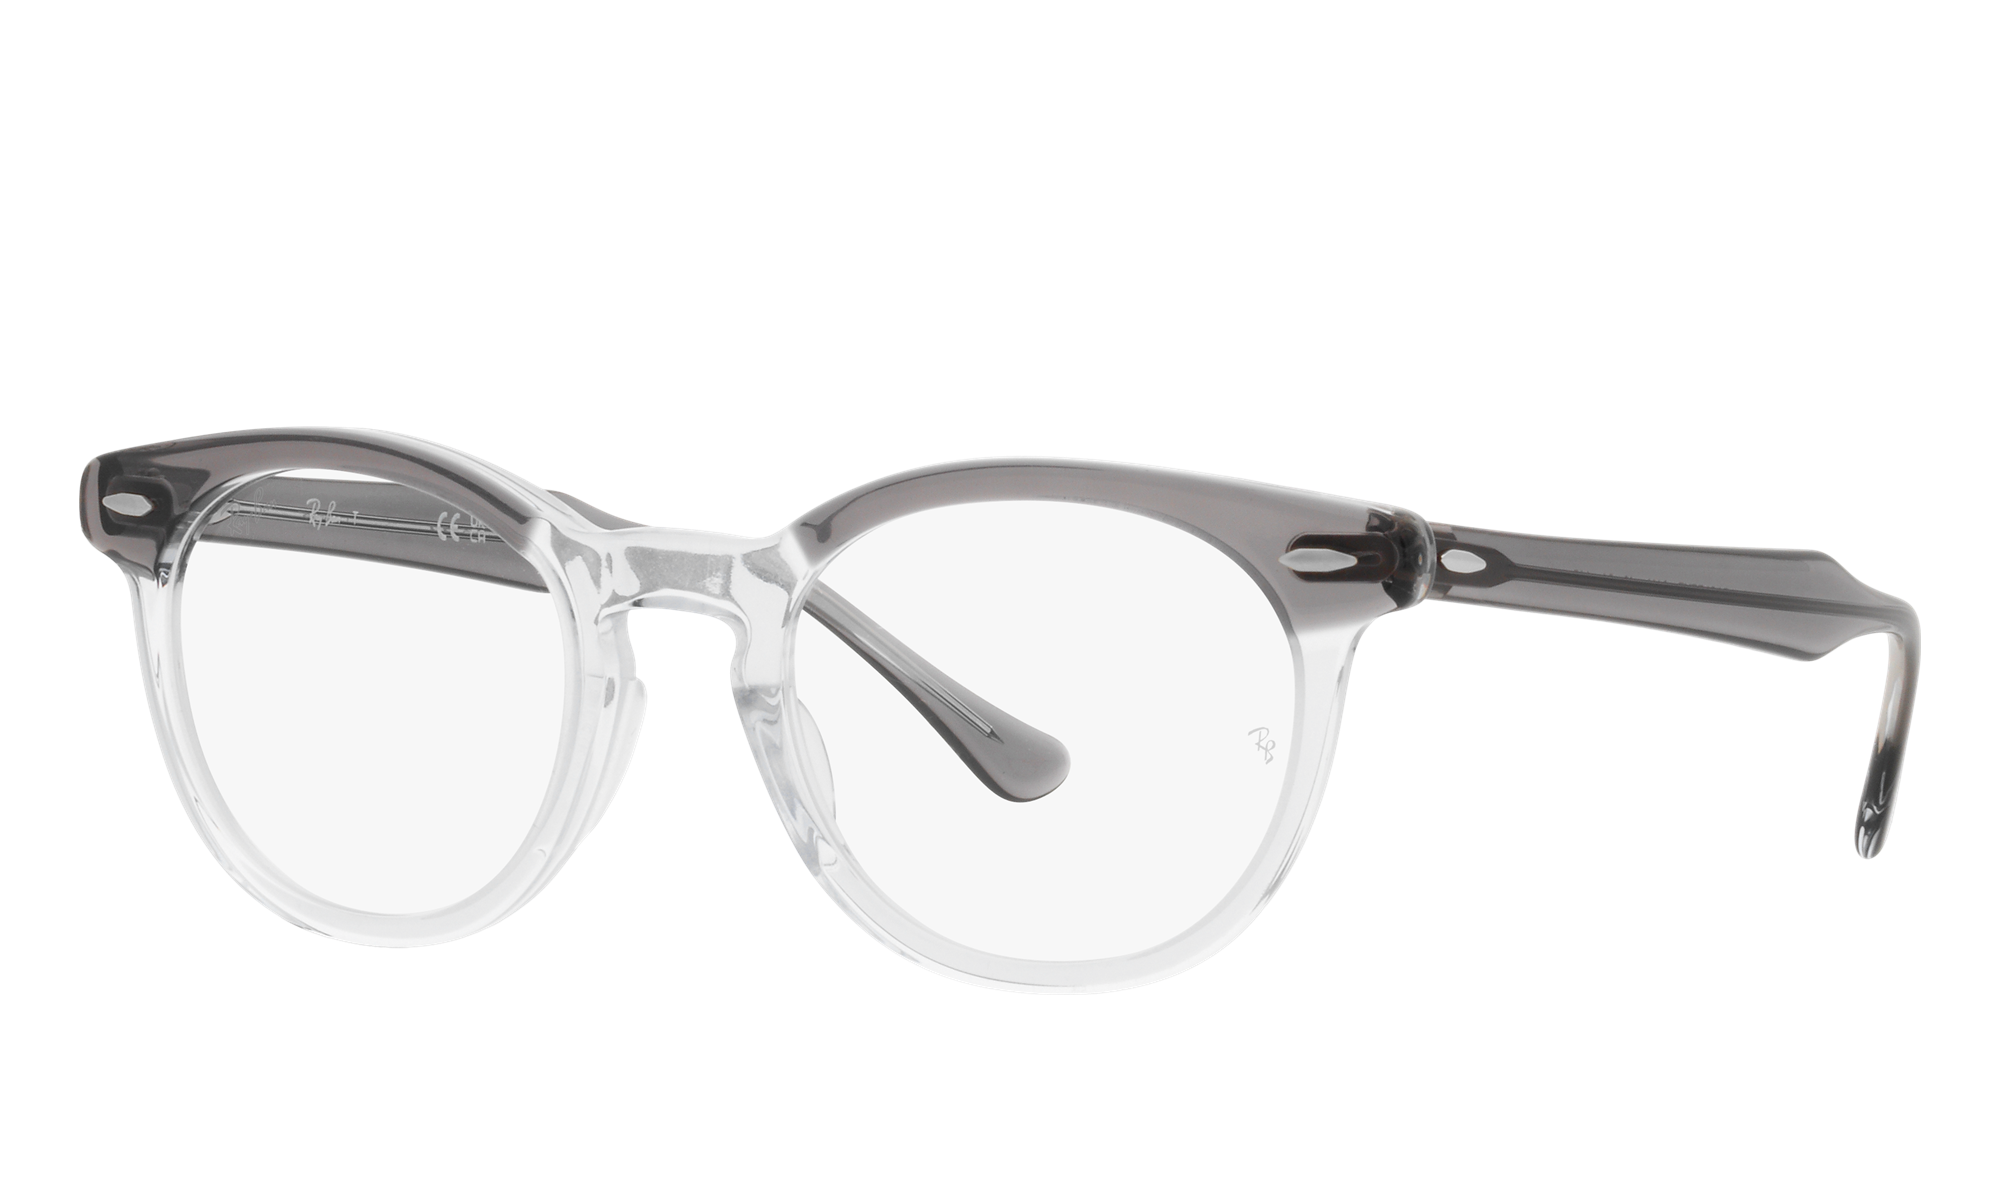 Ray-Ban Unisex Rx5598 Grey On Transparent Size: Standard